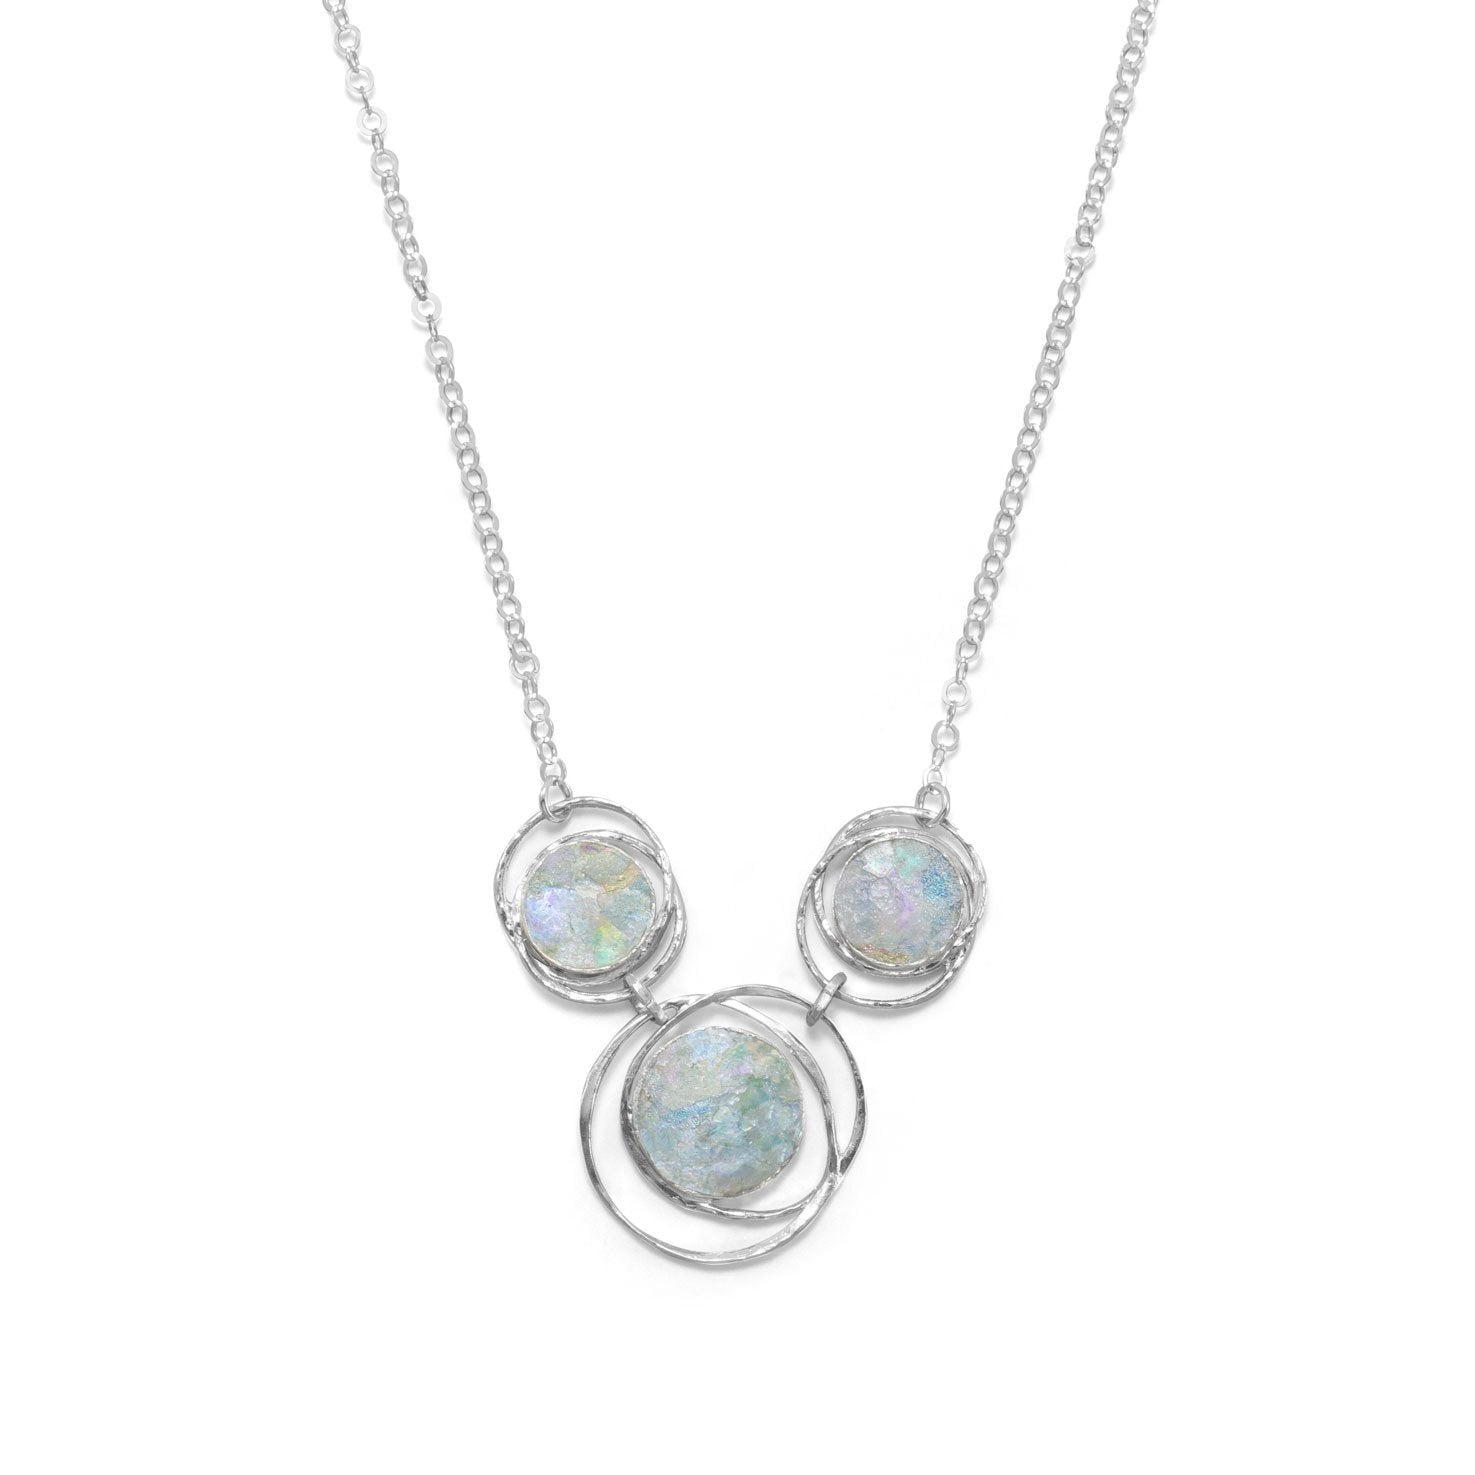 Sterling Silver Circle Roman Glass Necklace - Ameeru Goods